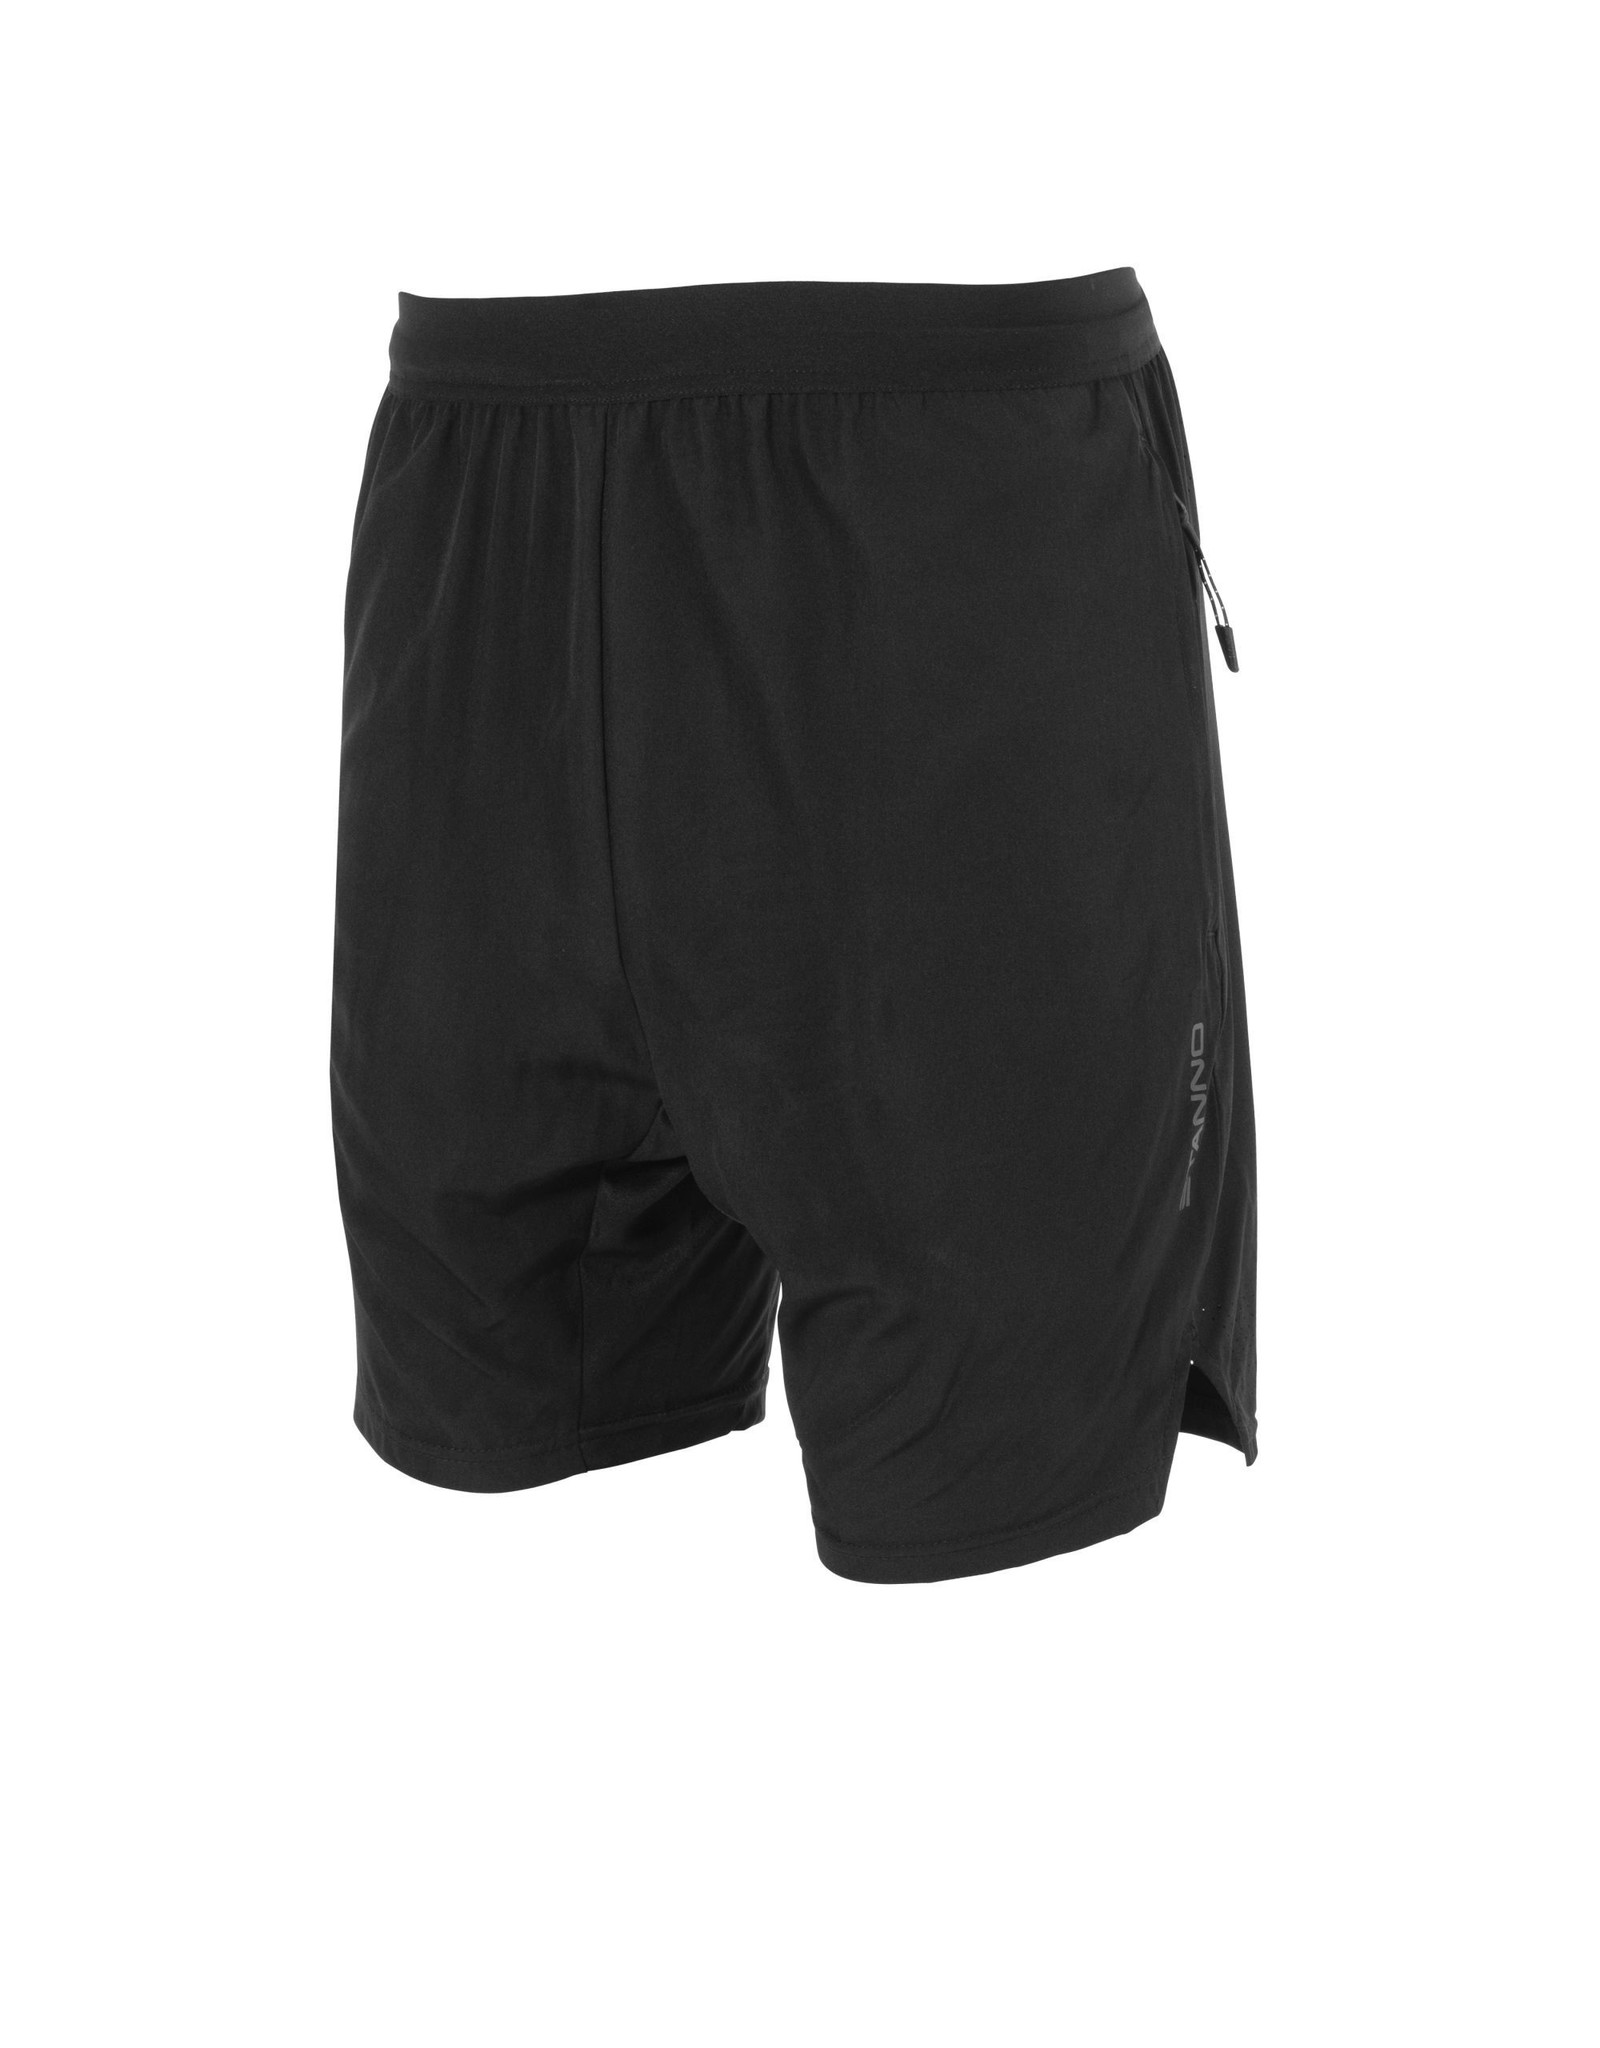 Stanno Functionals Woven Shorts II-Black